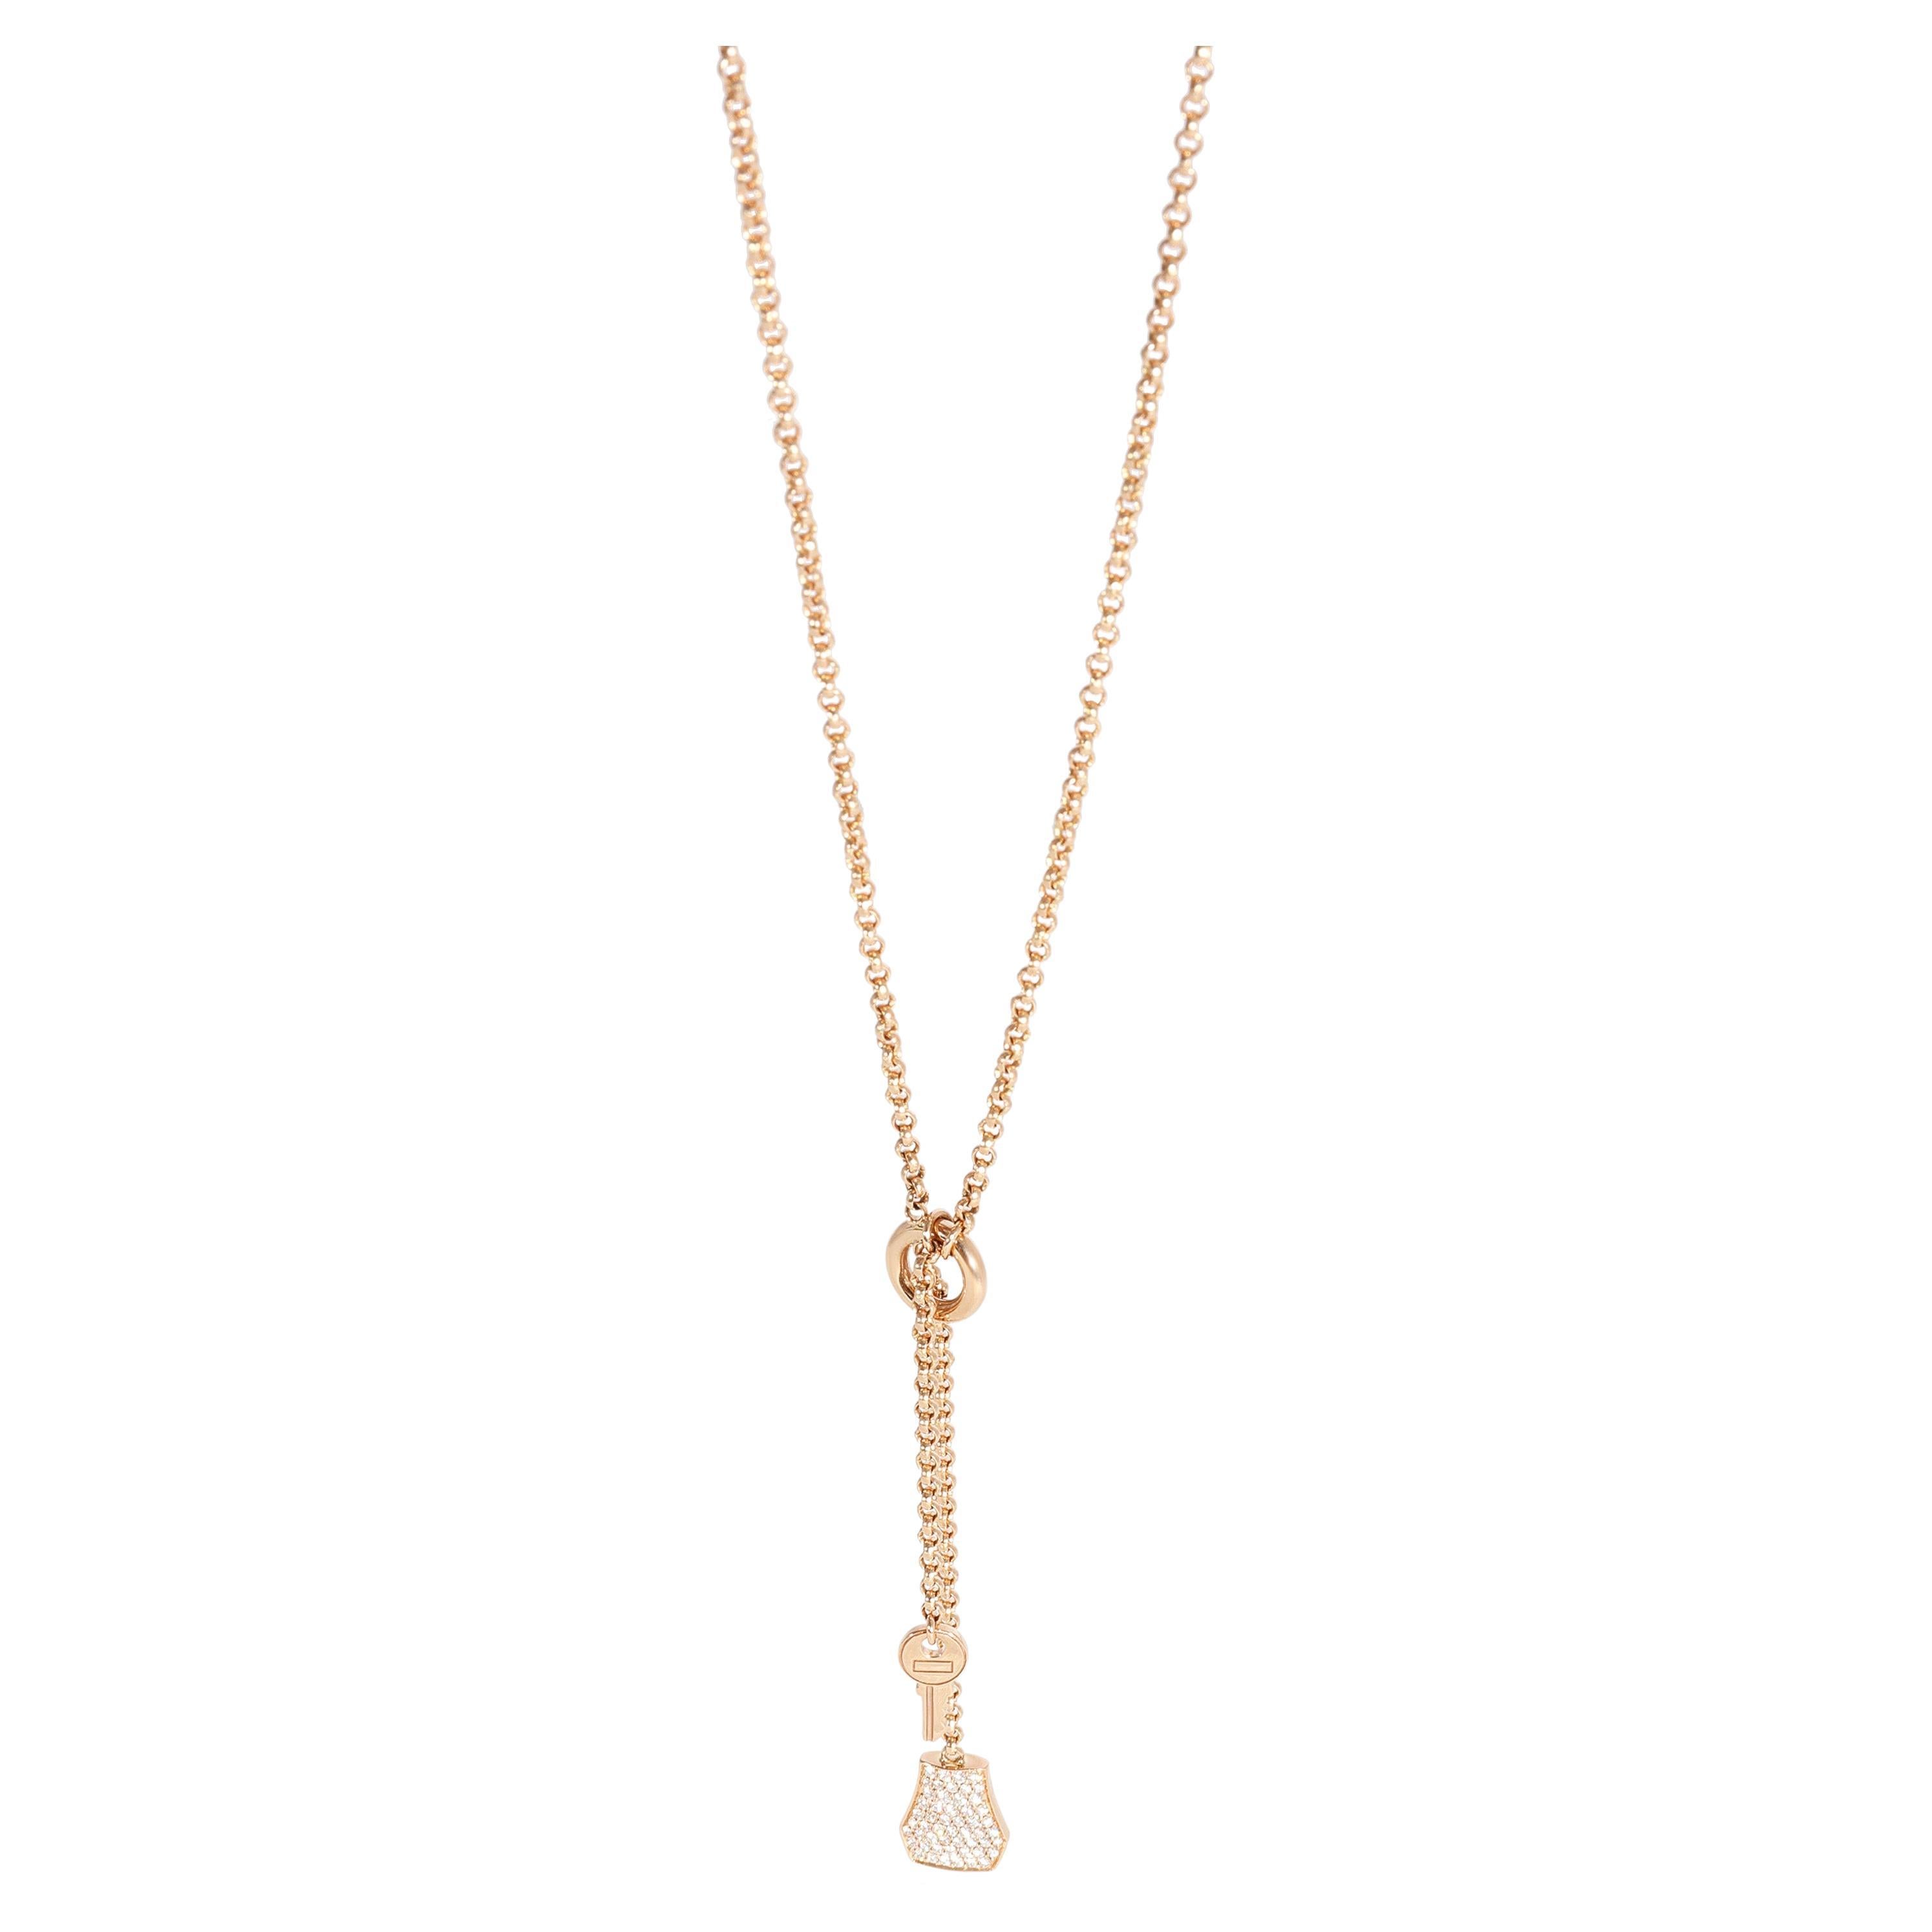 Hermes Kelly Clochette Necklace, Small Model in 18K Rose Gold 0.53 CTW